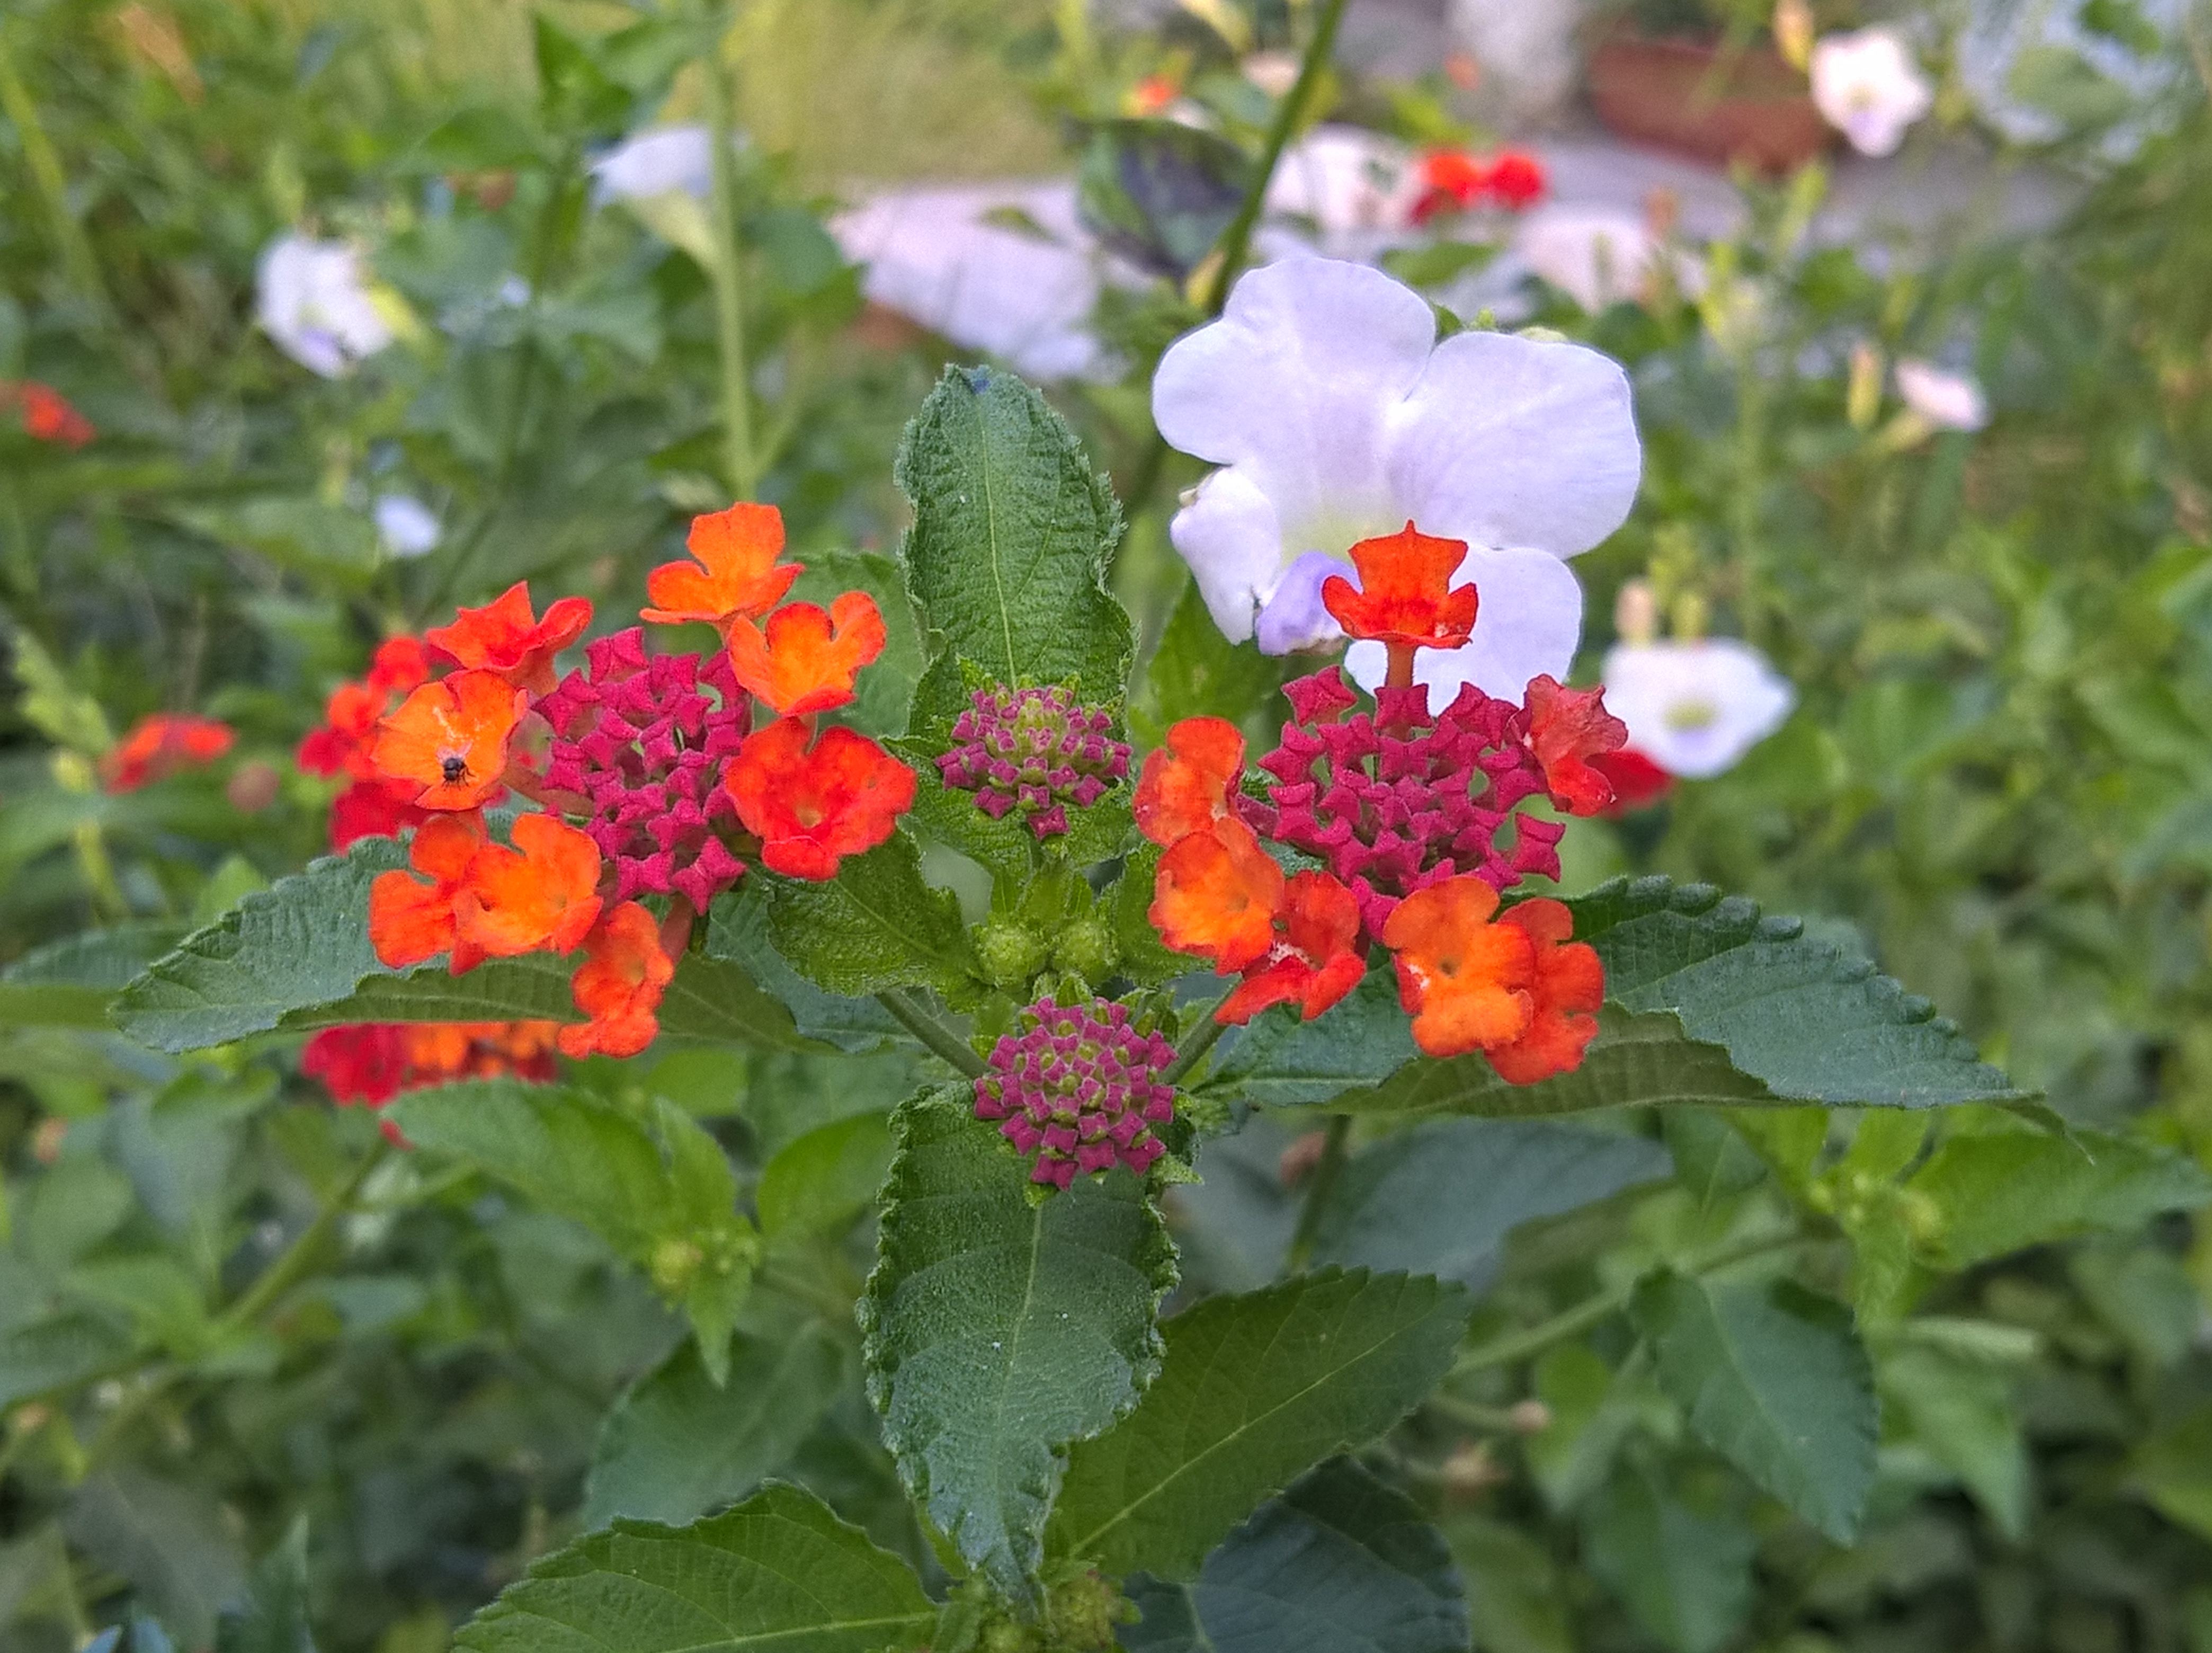 Microsoft Lumia Xl Camera Re A Capable Pair Of All Round